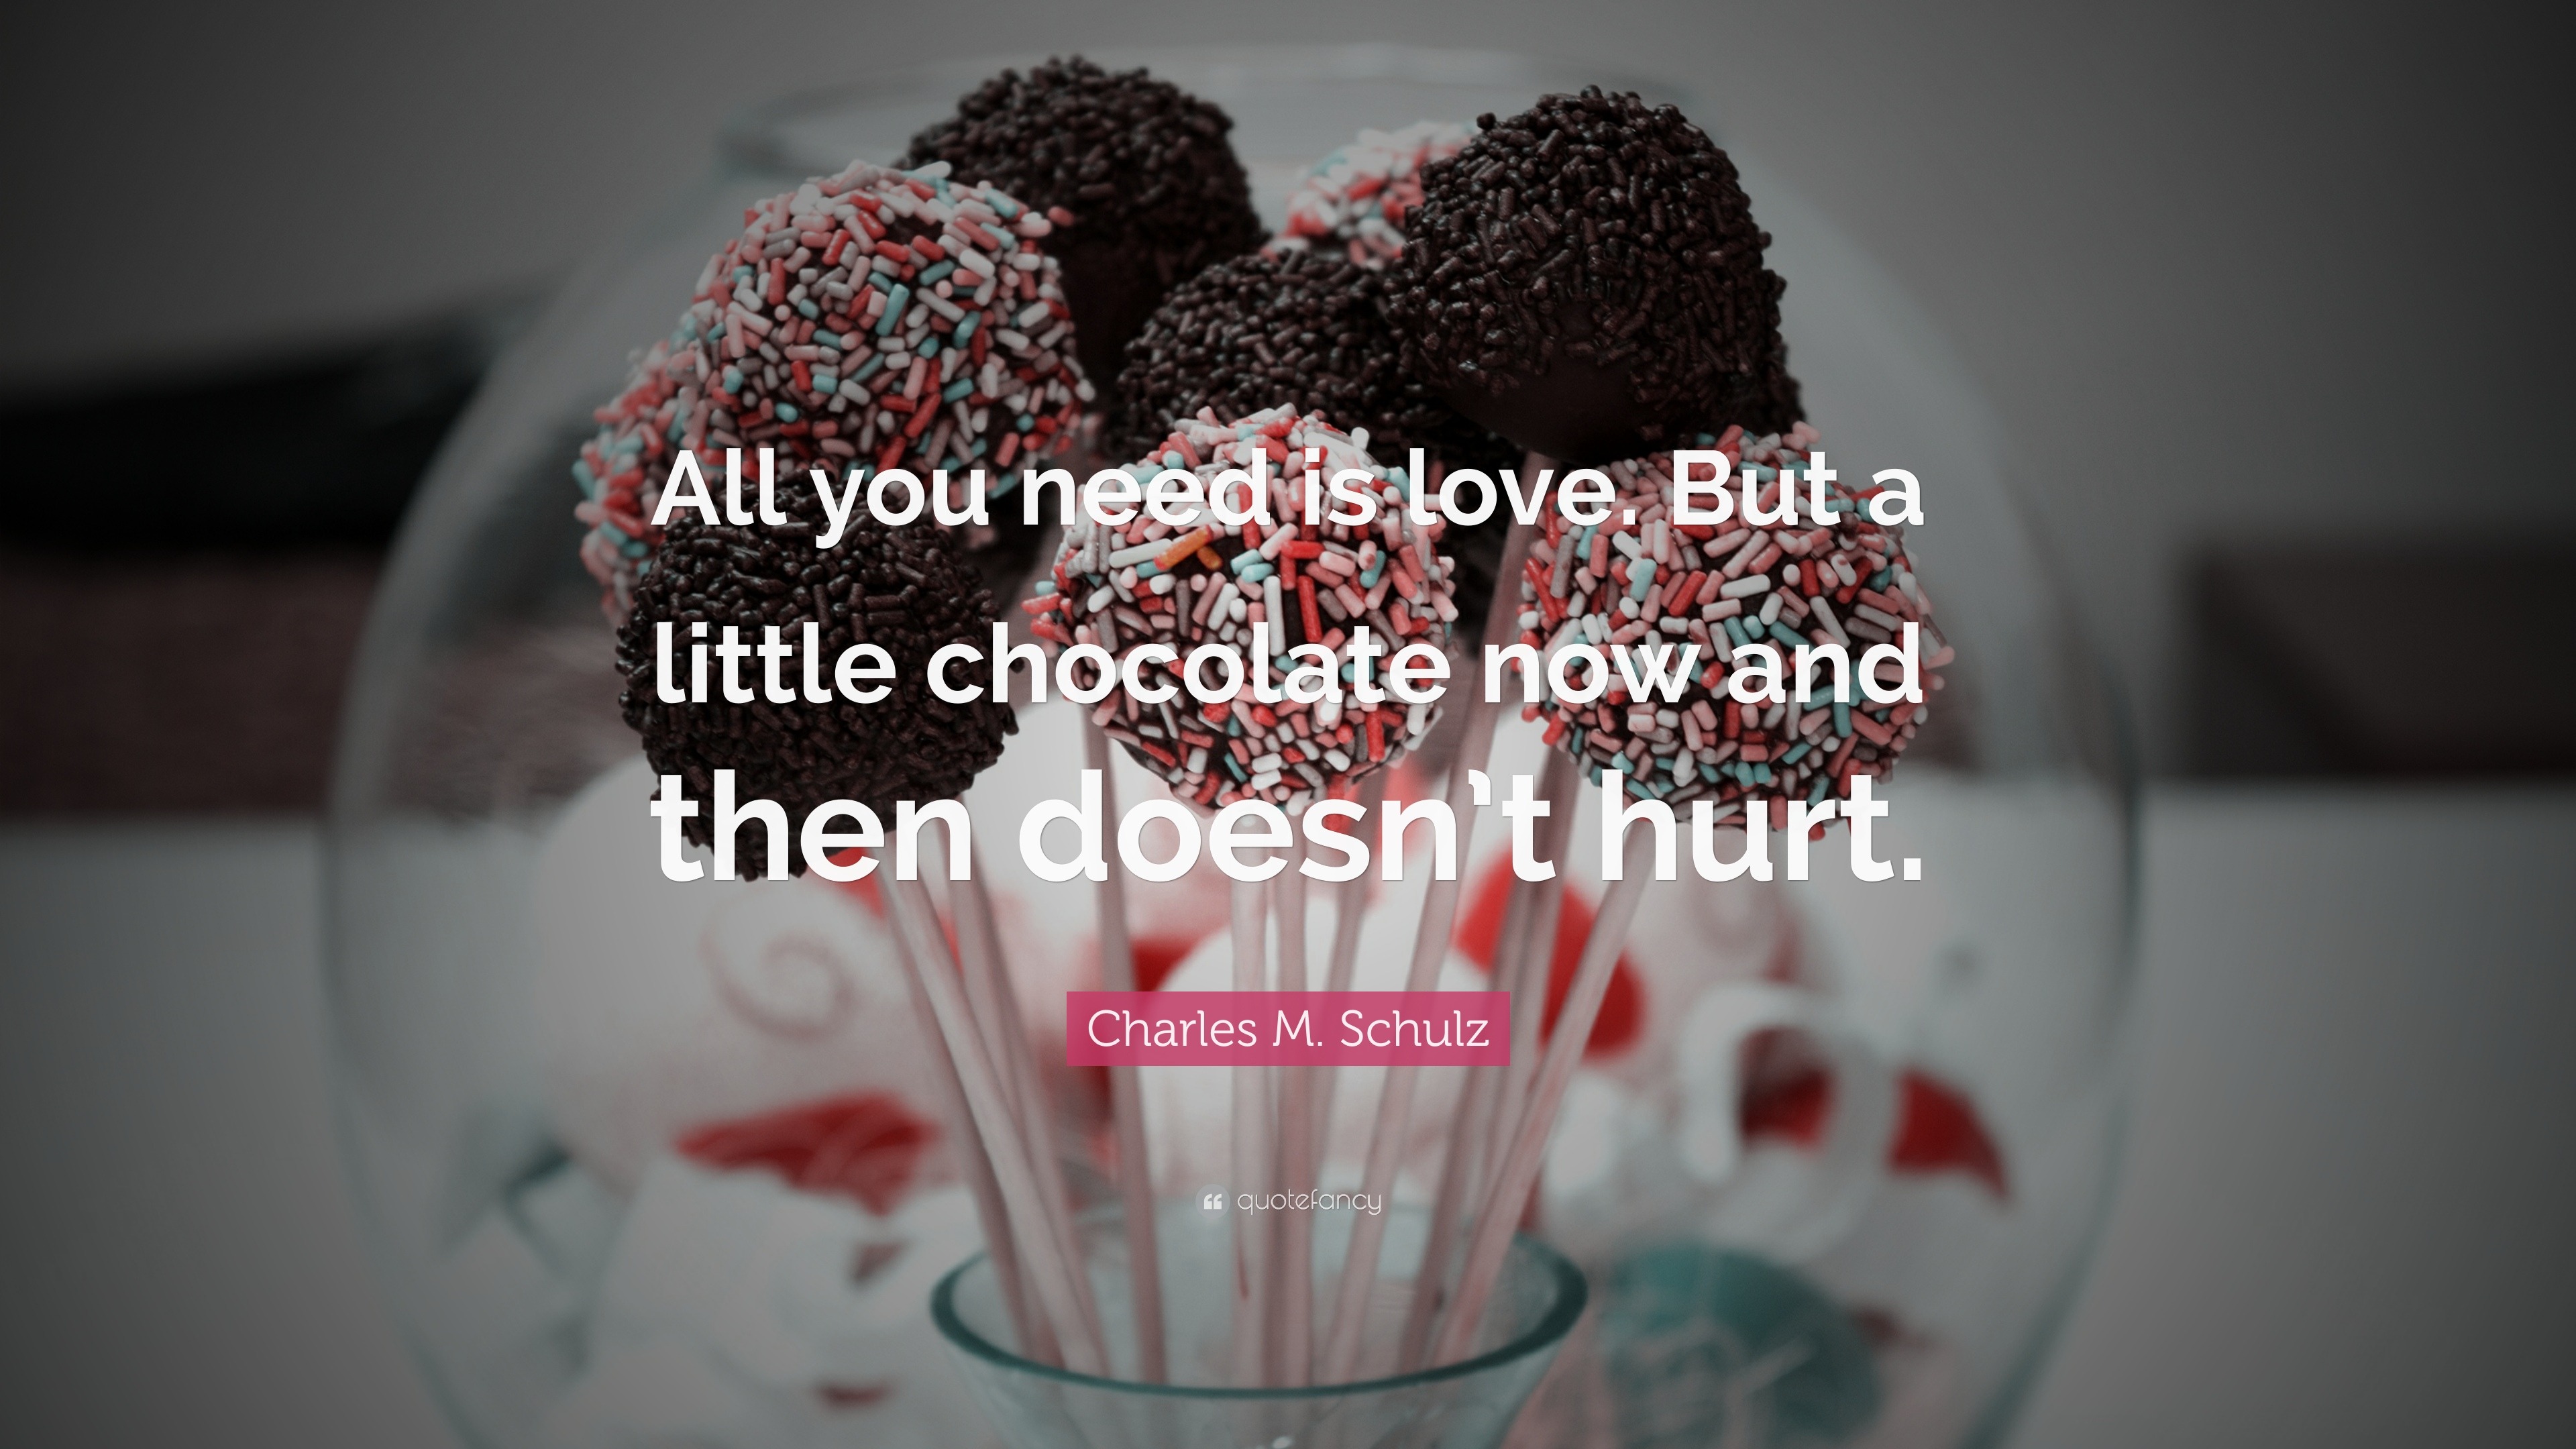 Love Quotes “All you need is love But a little chocolate now and